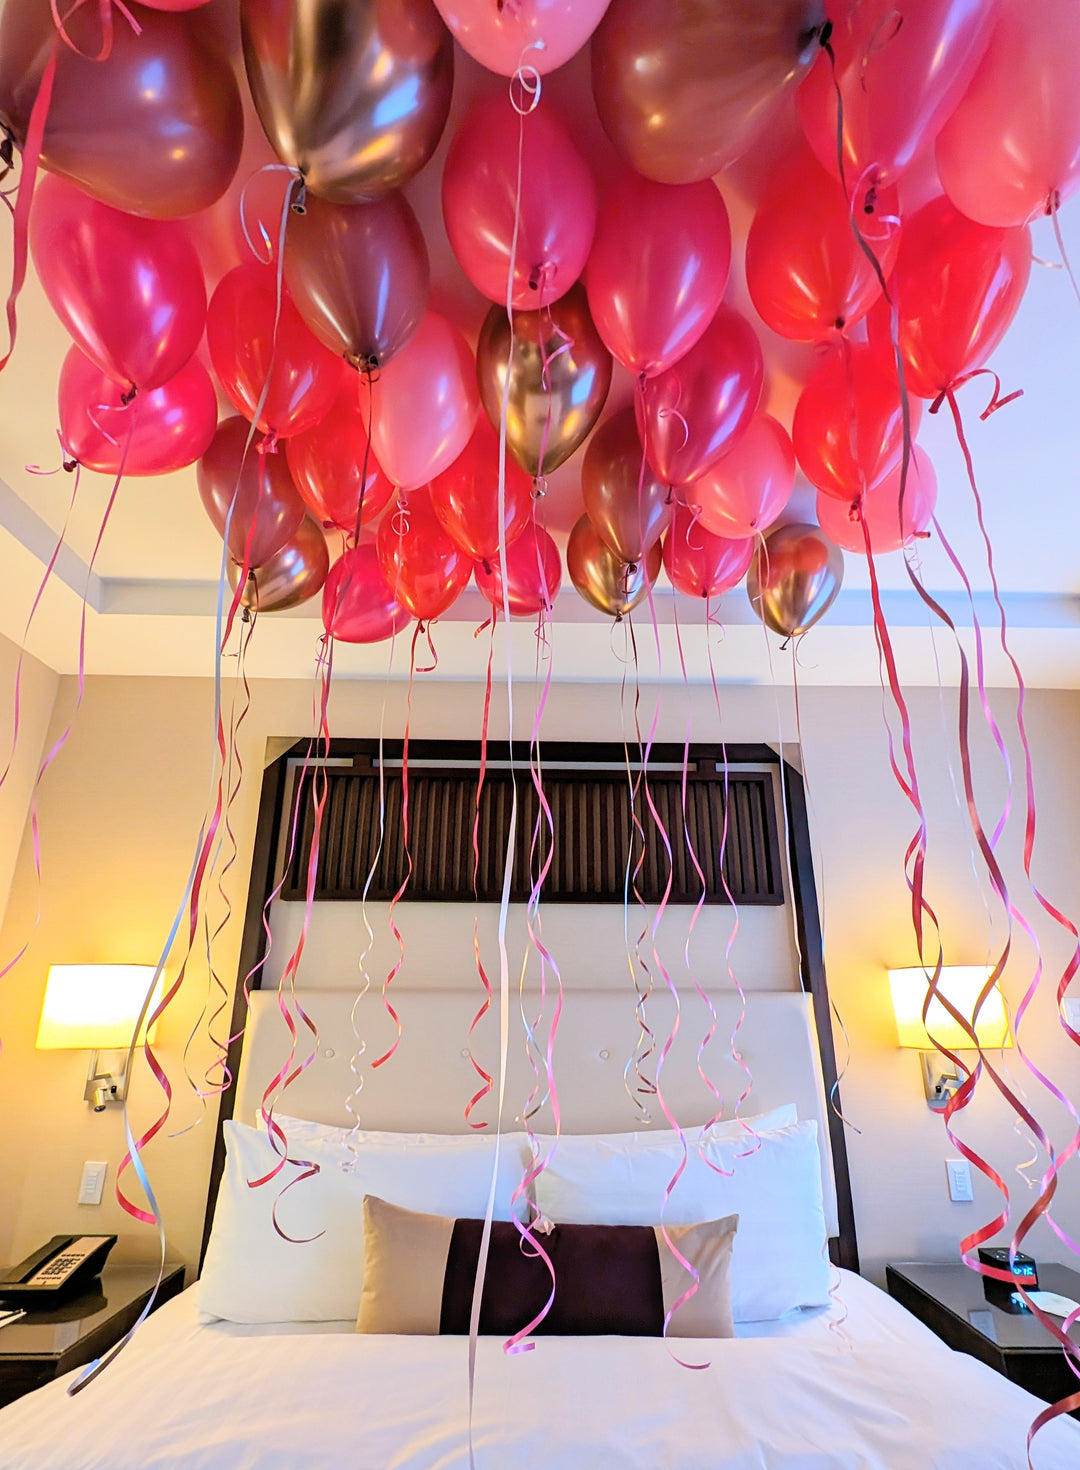 Valentines Day Loose Balloons